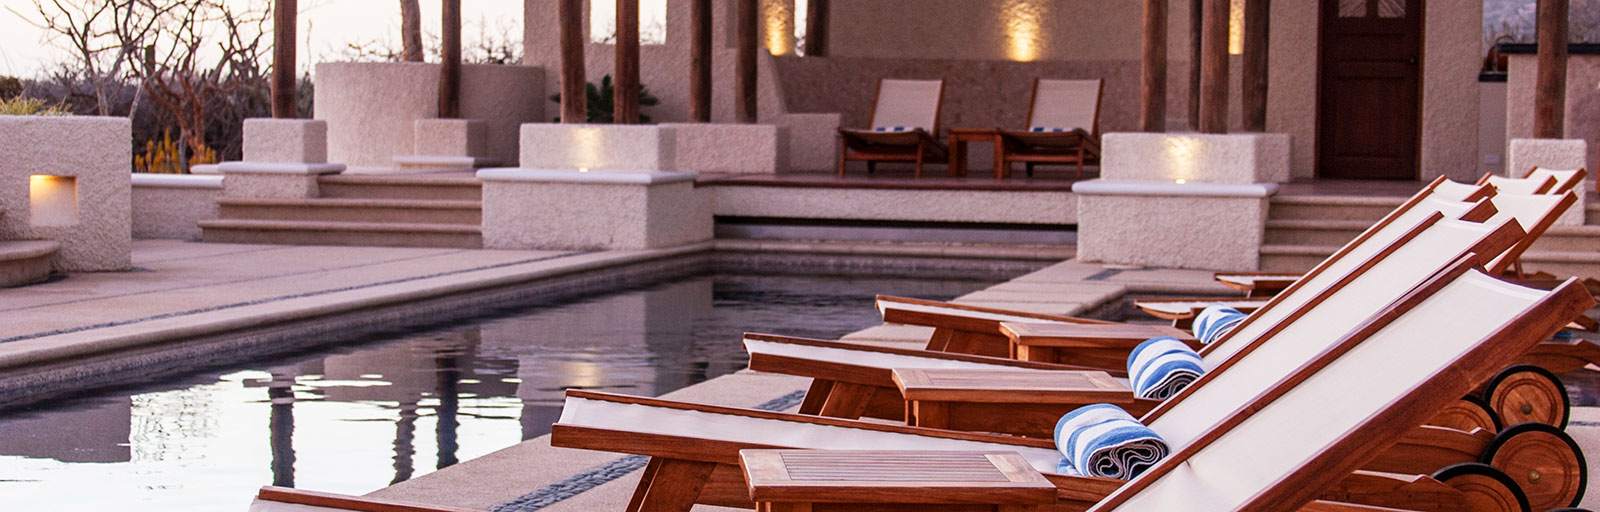 Mexico Yoga Retreats & Wellness Center: Chaise Lounges in the Swimming Pool